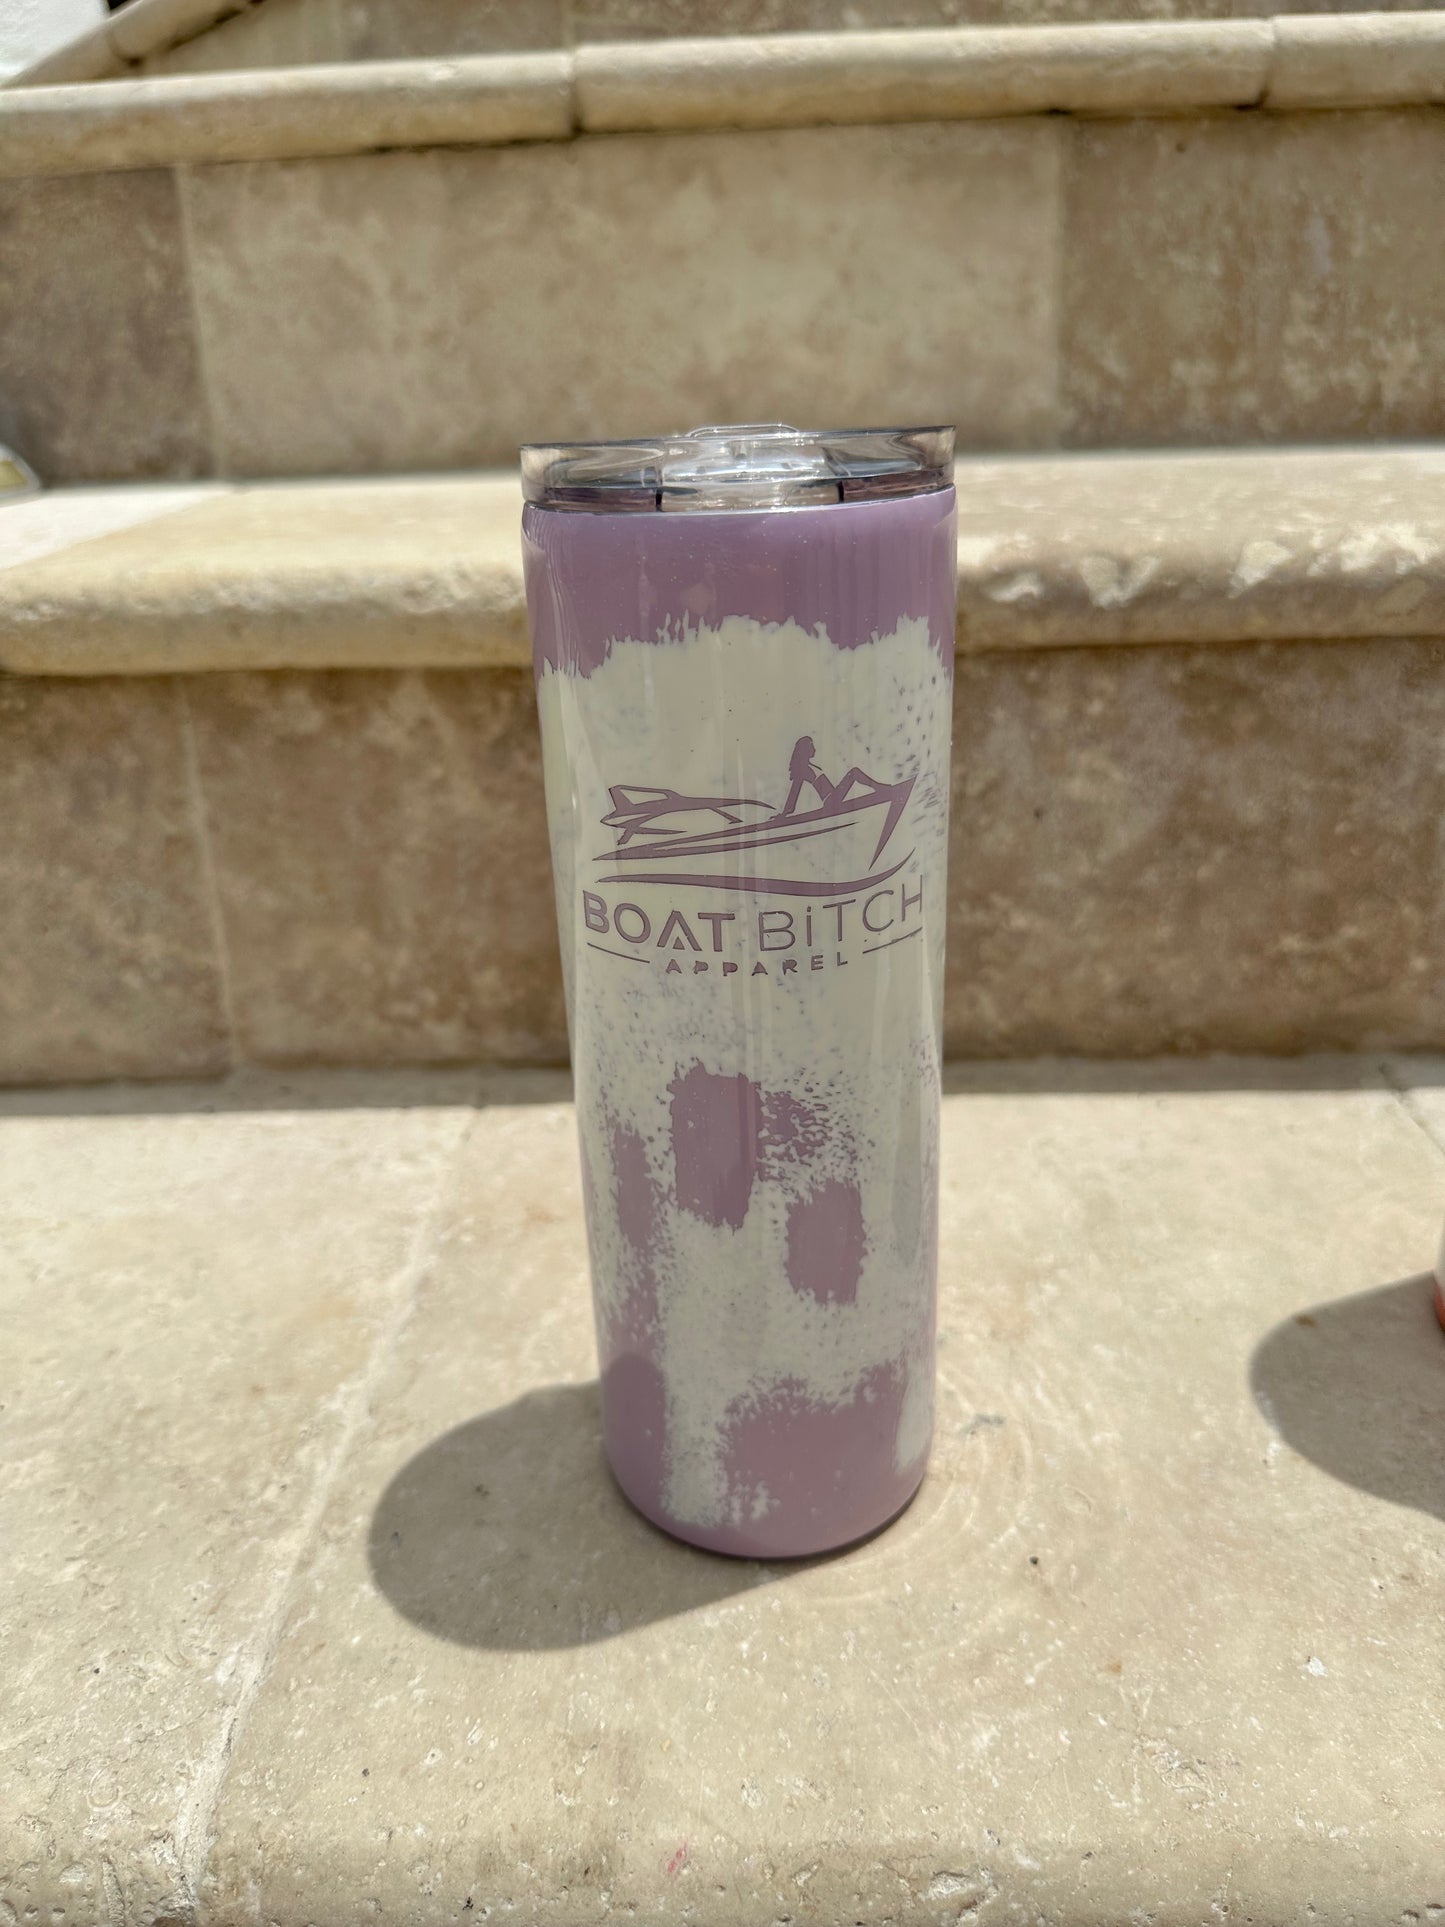 'Drink all day' Tumbler